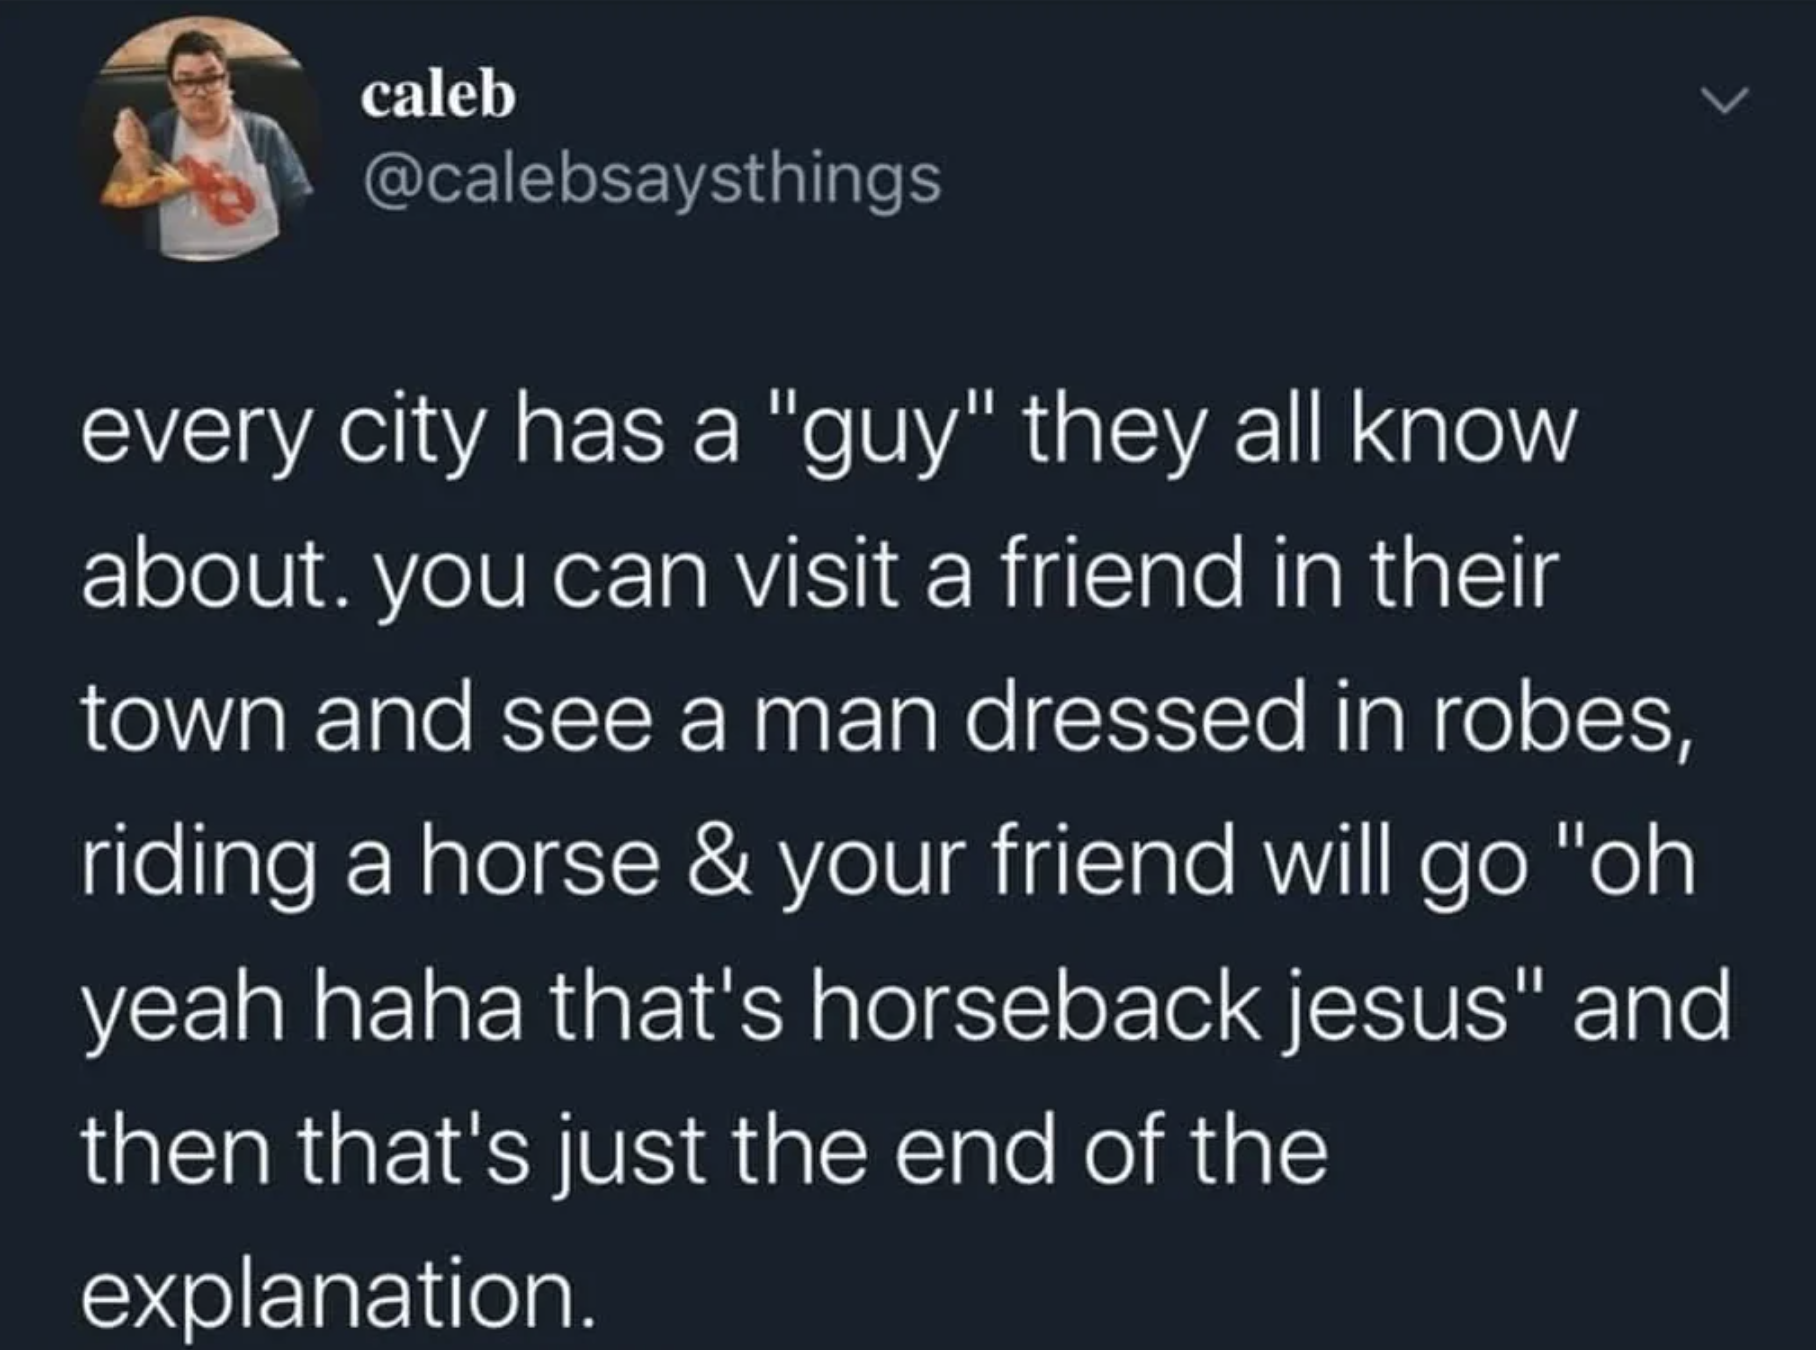 screenshot - caleb every city has a "guy" they all know about. you can visit a friend in their town and see a man dressed in robes, riding a horse & your friend will go "oh yeah haha that's horseback jesus" and then that's just the end of the explanation.